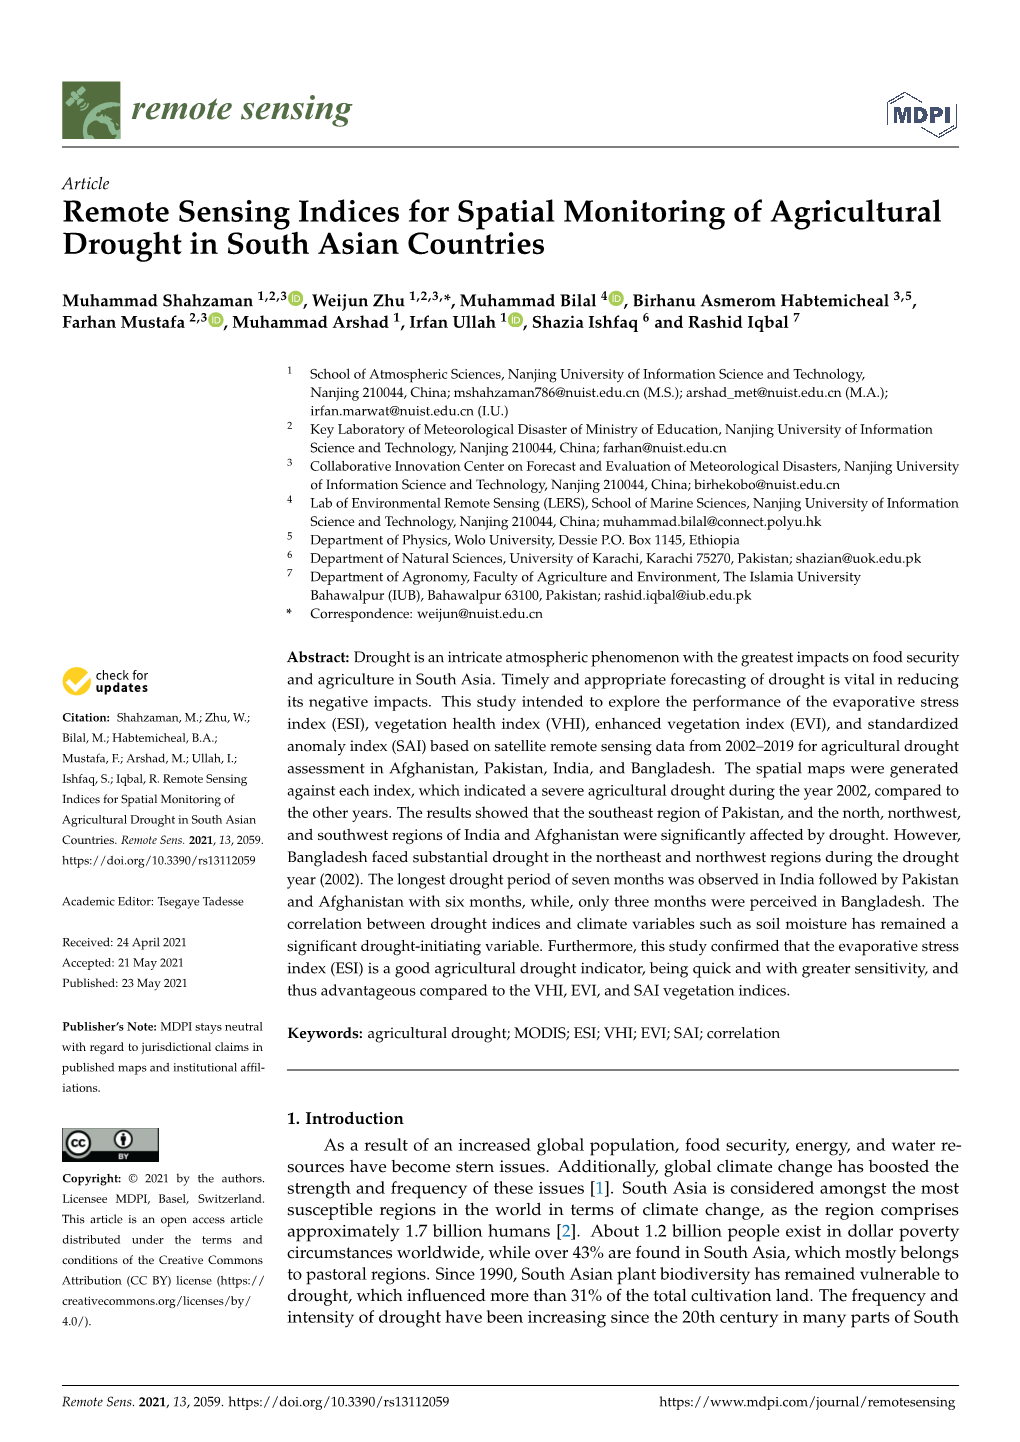 Remote Sensing Indices for Spatial Monitoring of Agricultural Drought in South Asian Countries